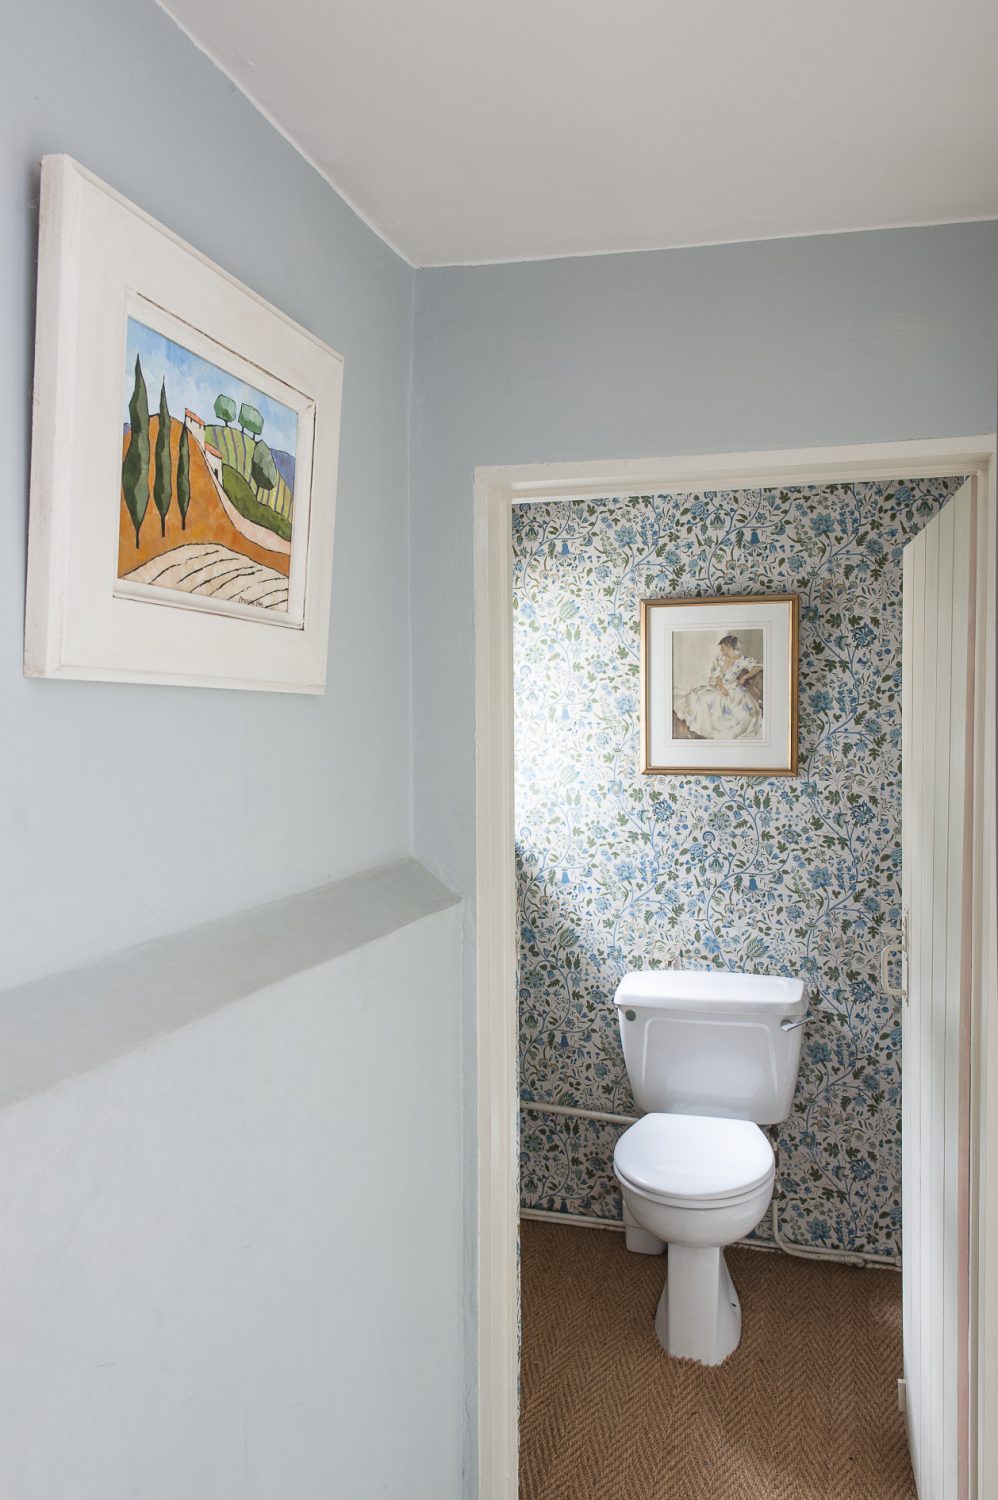 An upstairs loo remains decorated in the original blue floral wallpaper chosen by a previous owner